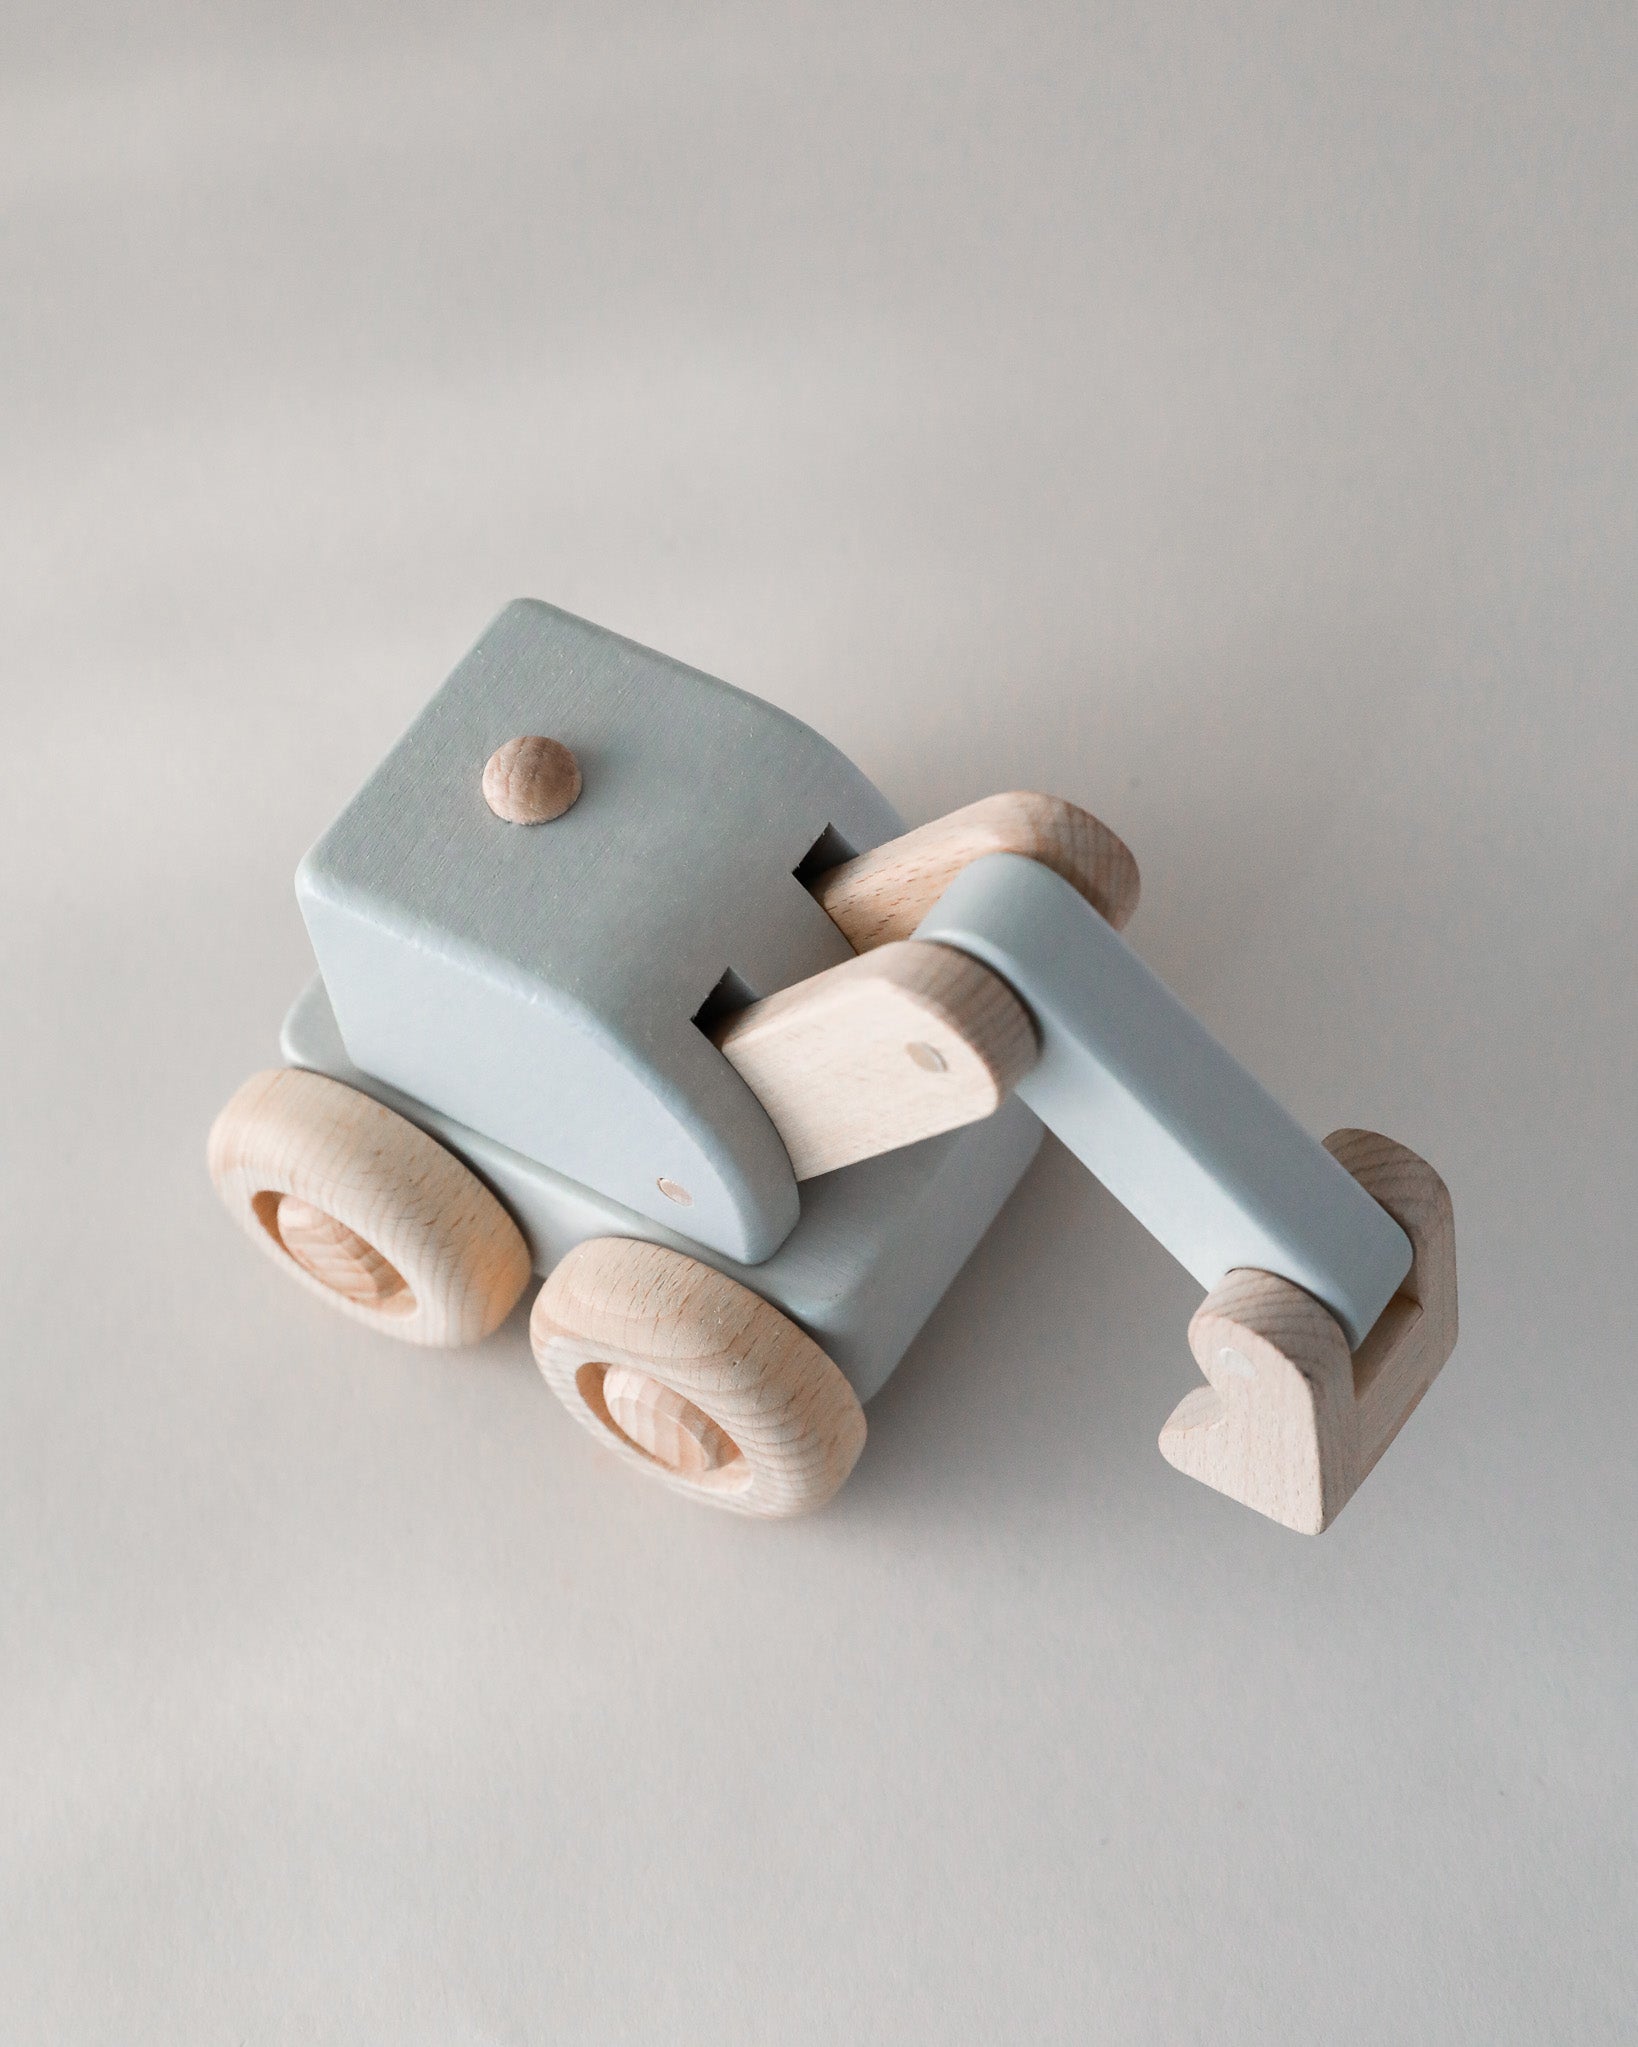 Wooden Toy Digger